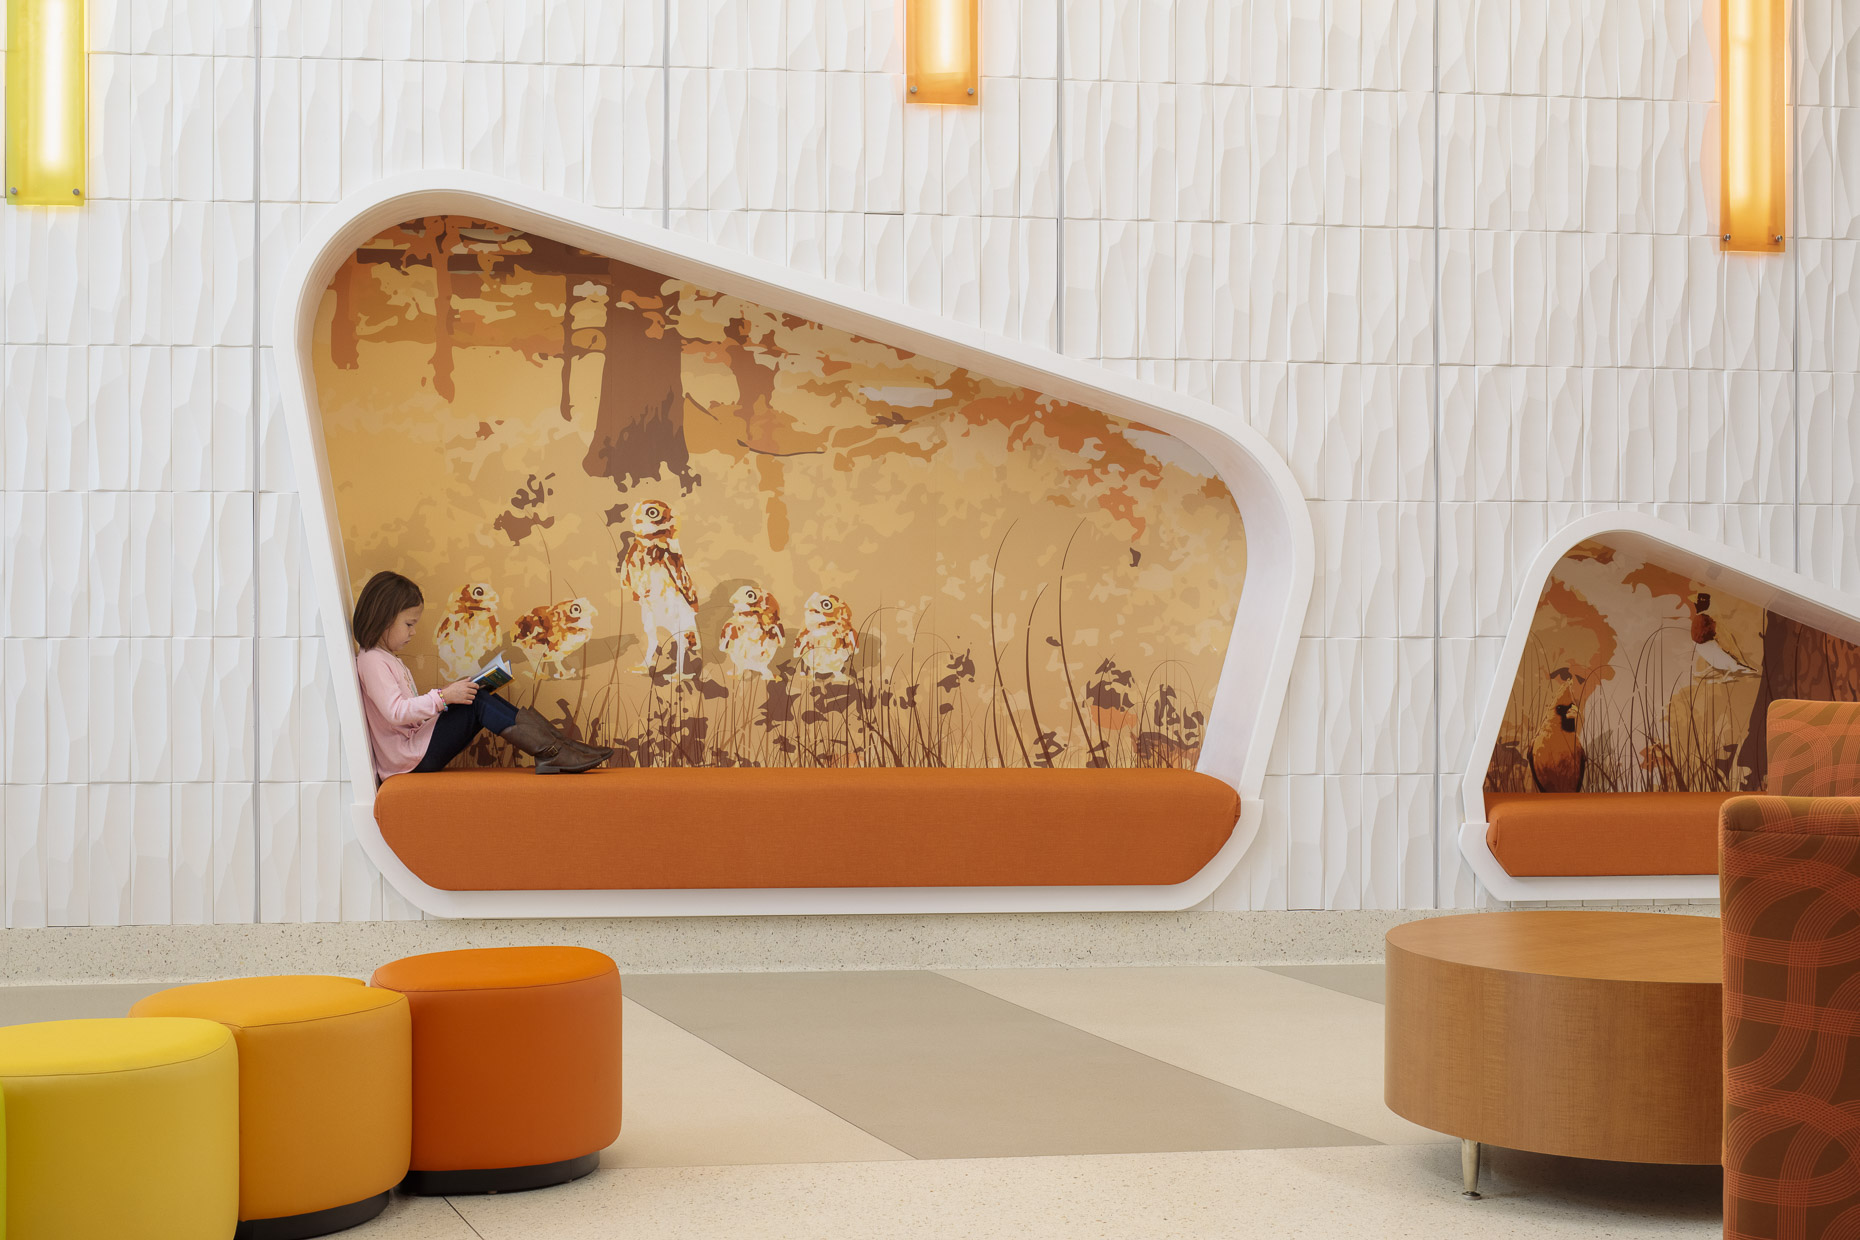 UofL Physicians Novak Center for Children by GBBN photographed by Brad Feinknopf based in Columbus, Ohio